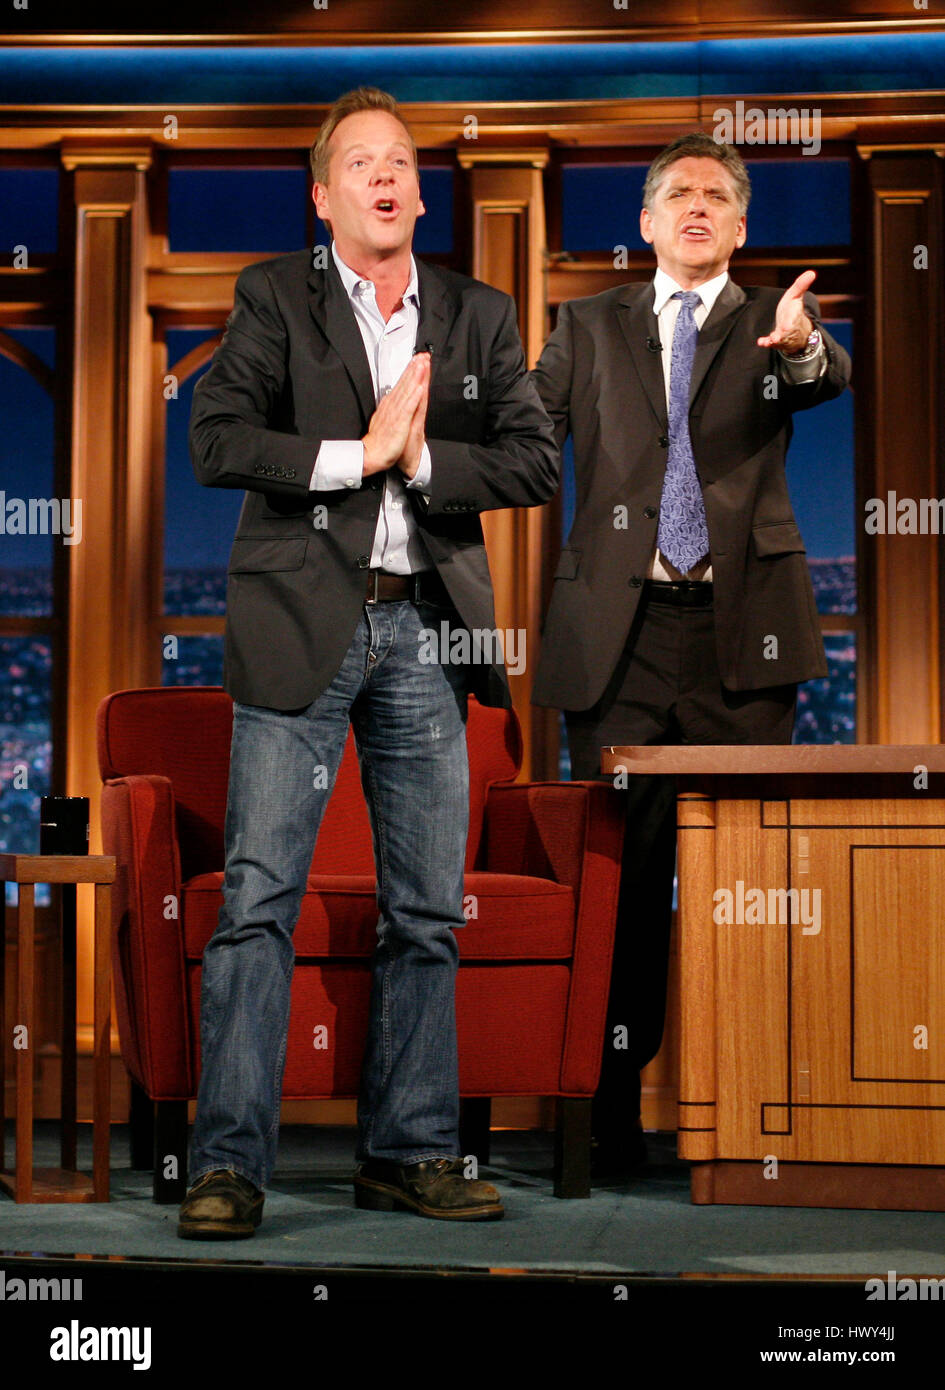 Actor Kiefer Sutherland, left, with host Craig Ferguson during a segment of 'The Late Late Show with Craig Ferguson' at CBS Television City on August 12, 2008 in Los Angeles, California. Photo by Francis Specker Stock Photo